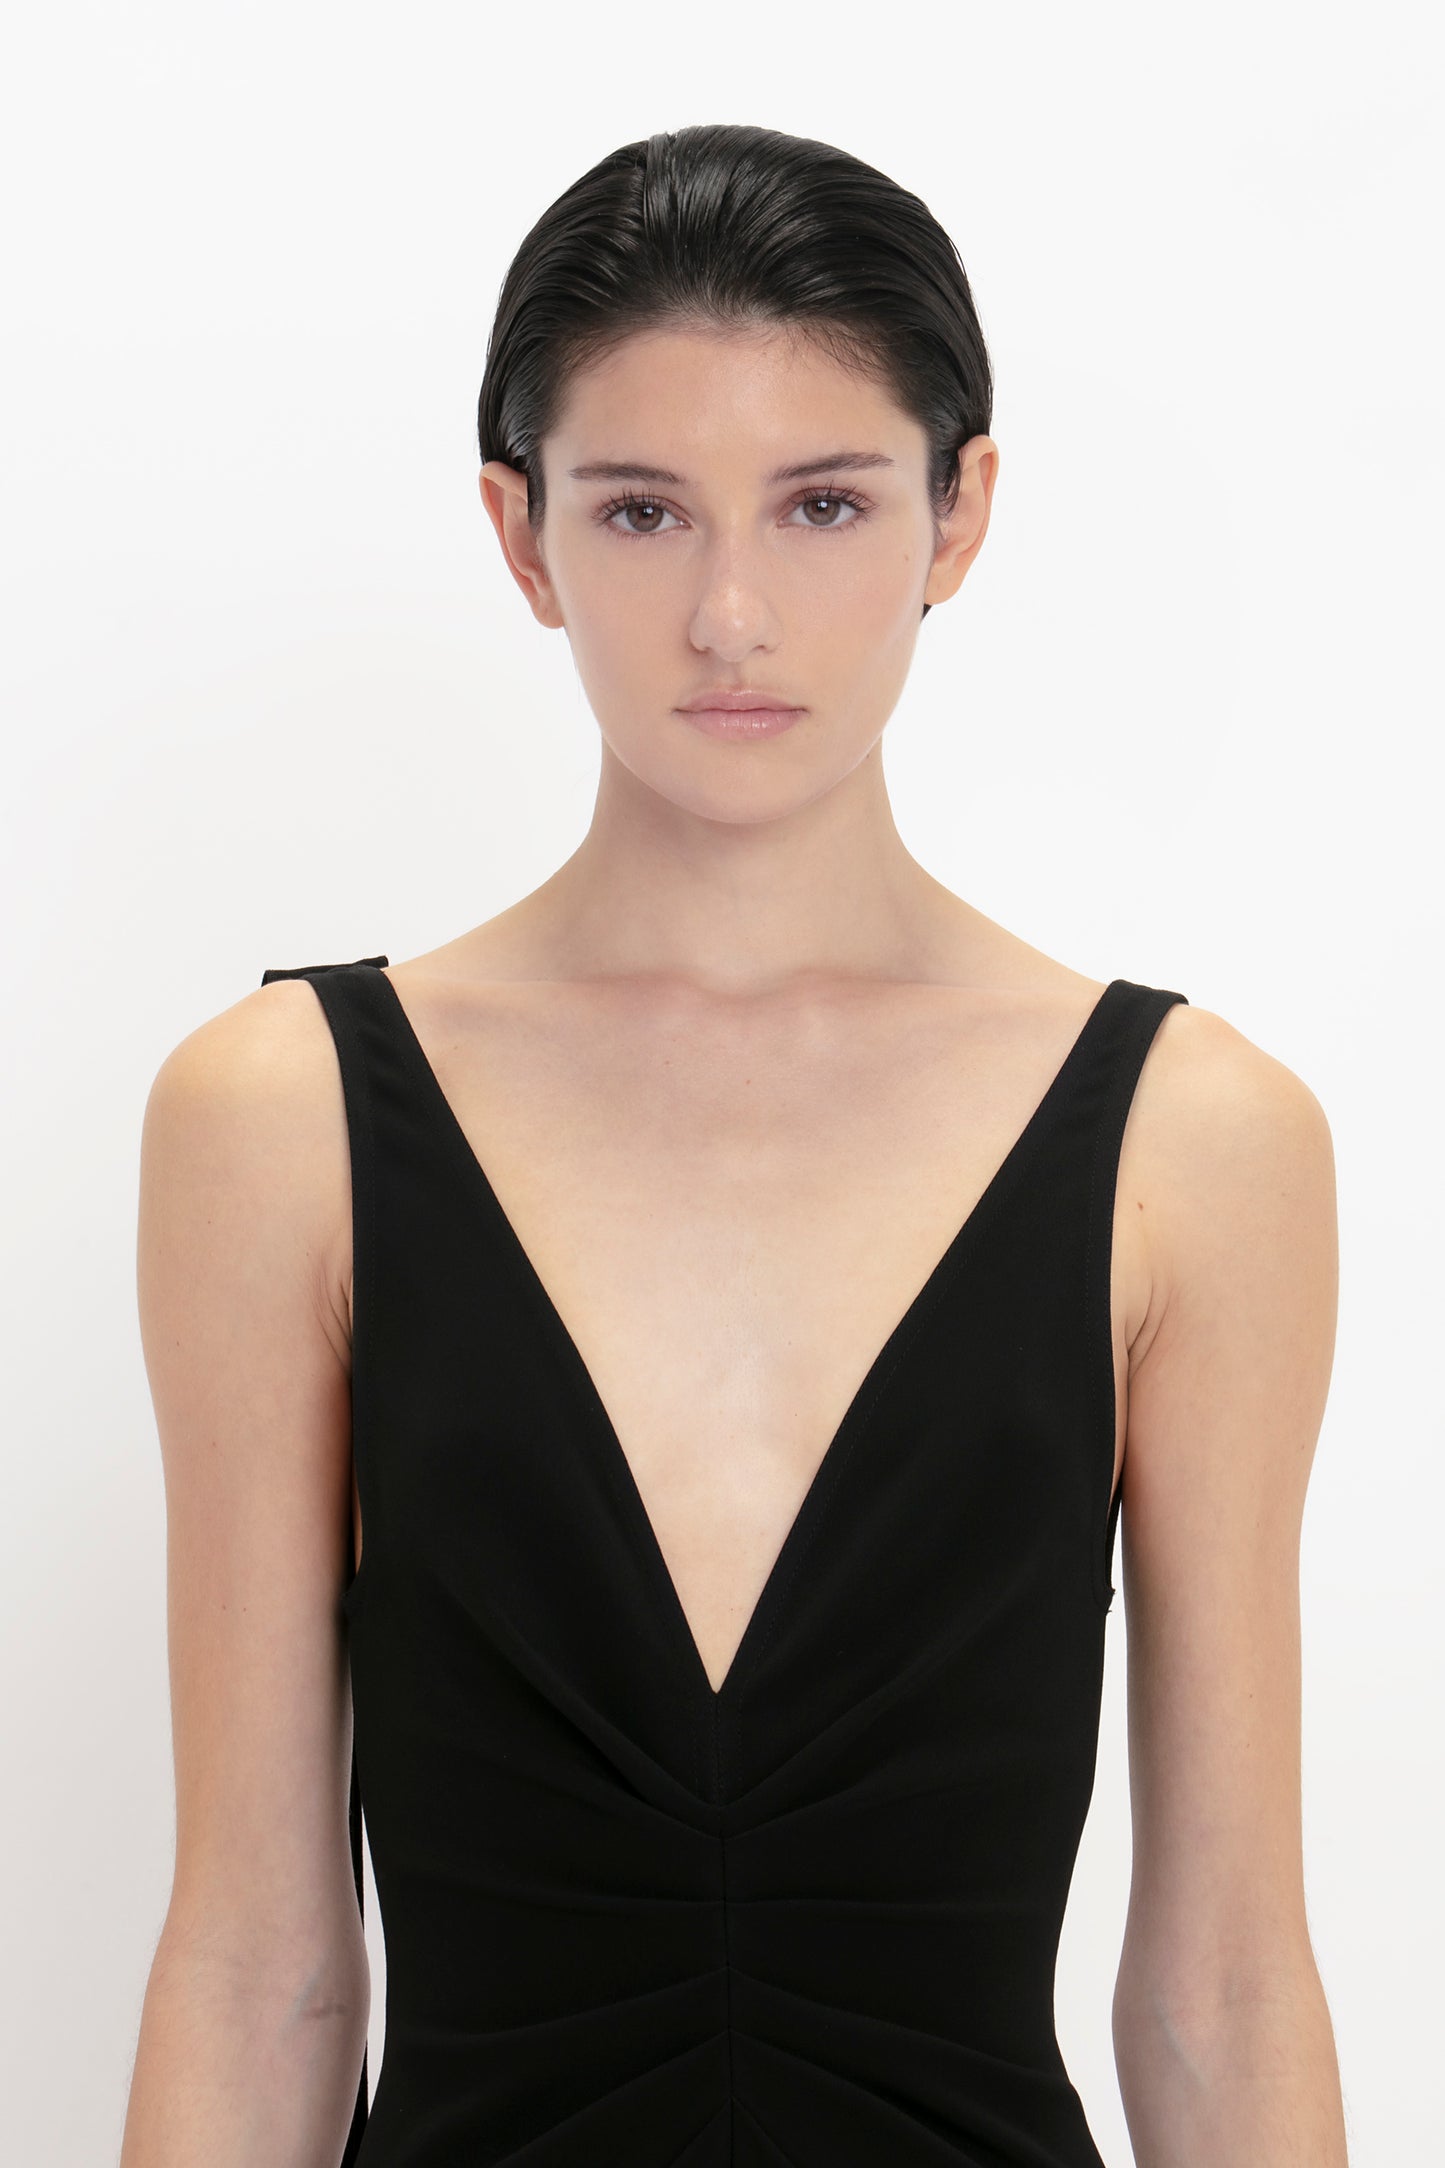 A person with short dark hair is wearing a sleeveless black V-Neck Gathered Waist Floor-Length Gown In Black by Victoria Beckham. Their expression is neutral, and they are standing against a plain white background.